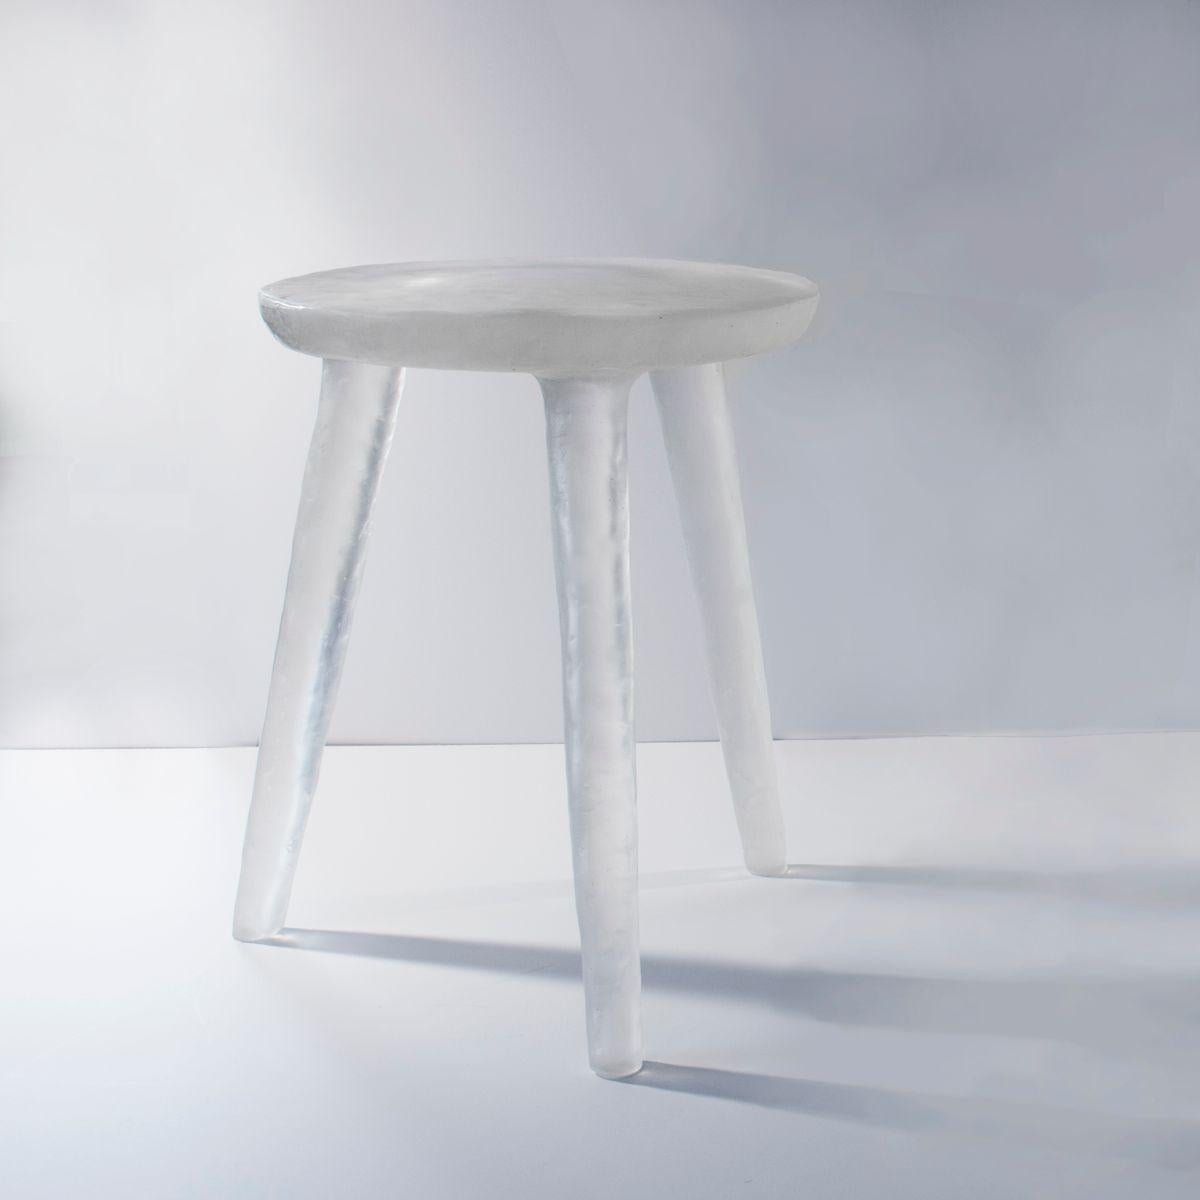 Organic Modern Glow Side Table / Stool 'Aqua' in Recycled Plastic For Sale